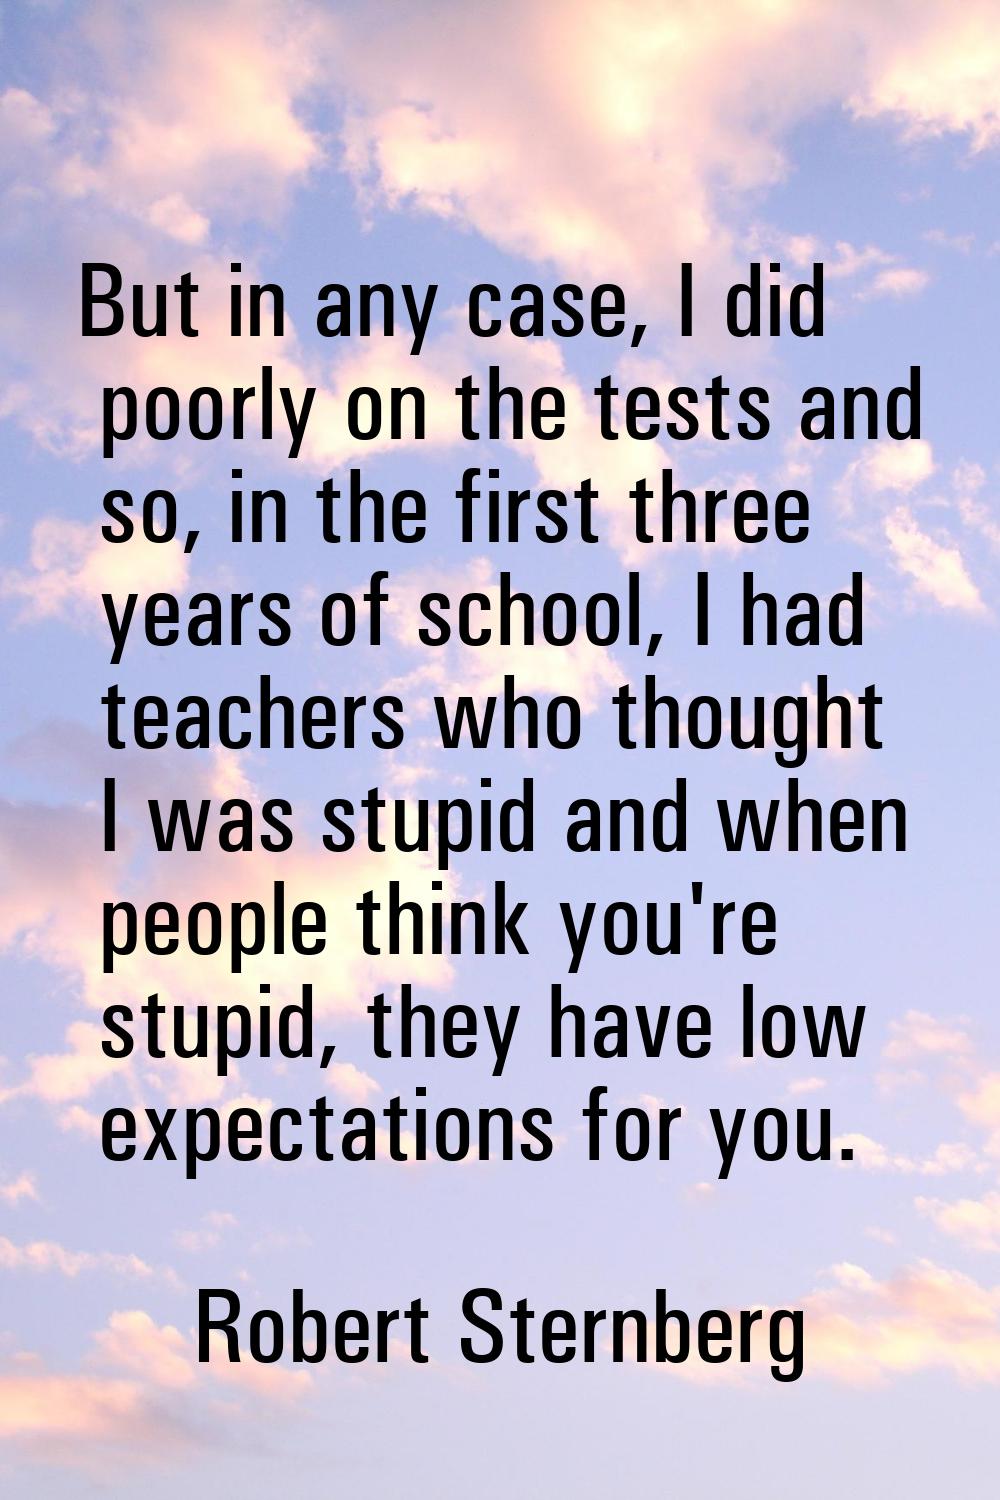 But in any case, I did poorly on the tests and so, in the first three years of school, I had teache